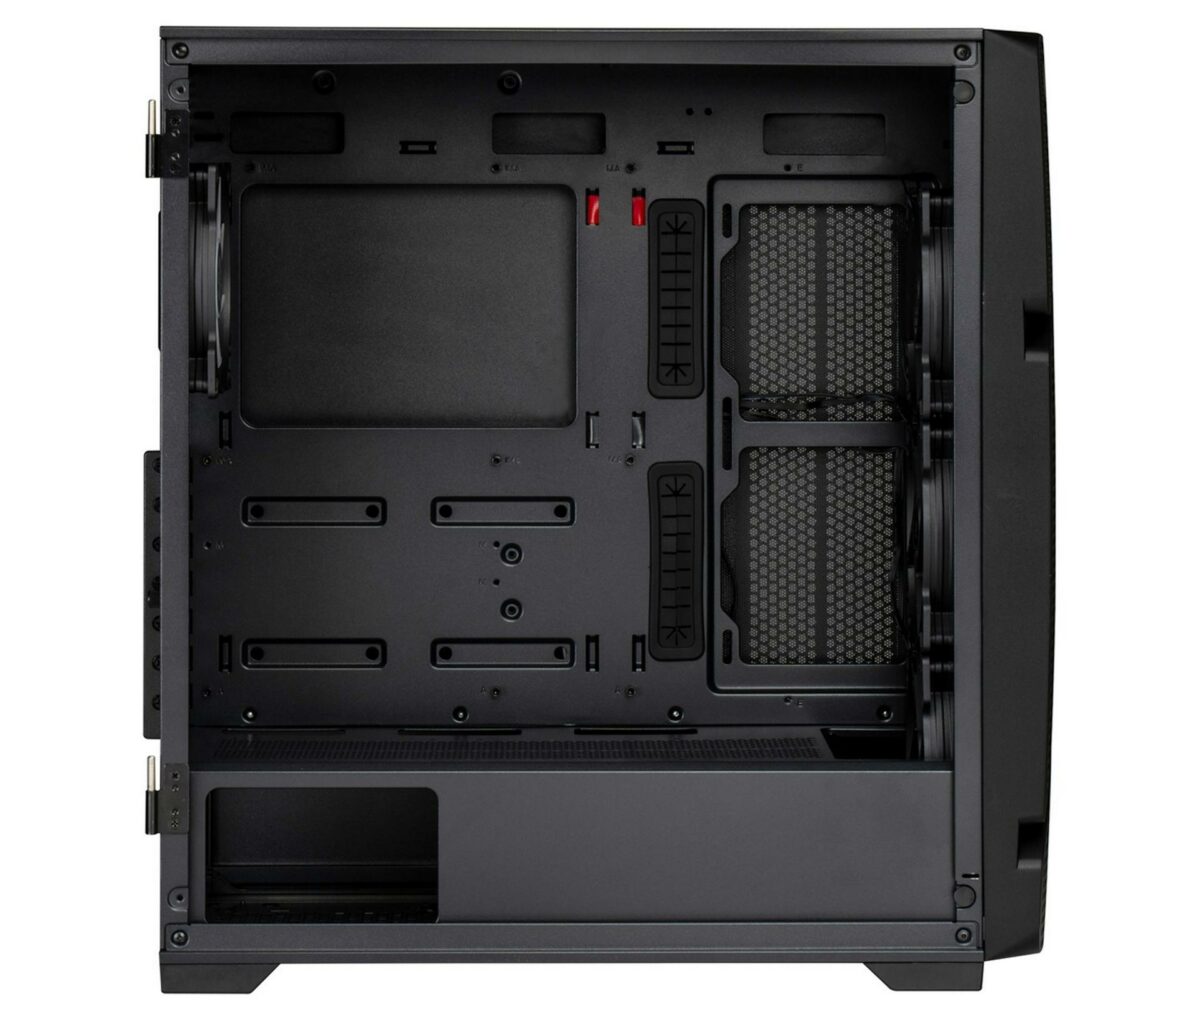 Enermax MS31 black PC case left side panel removed to showcase the interior.